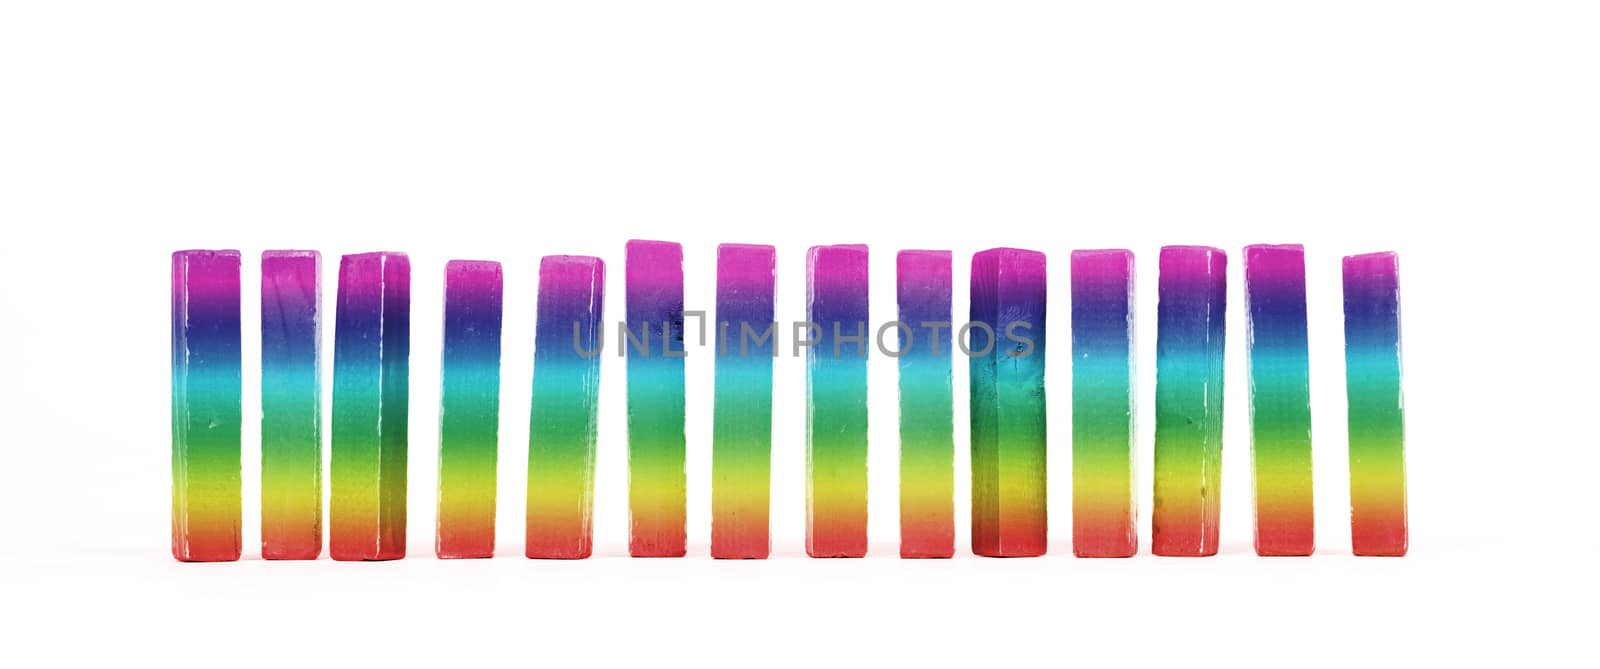 Row of vintage building blocks isolated on white background - Rainbow colored